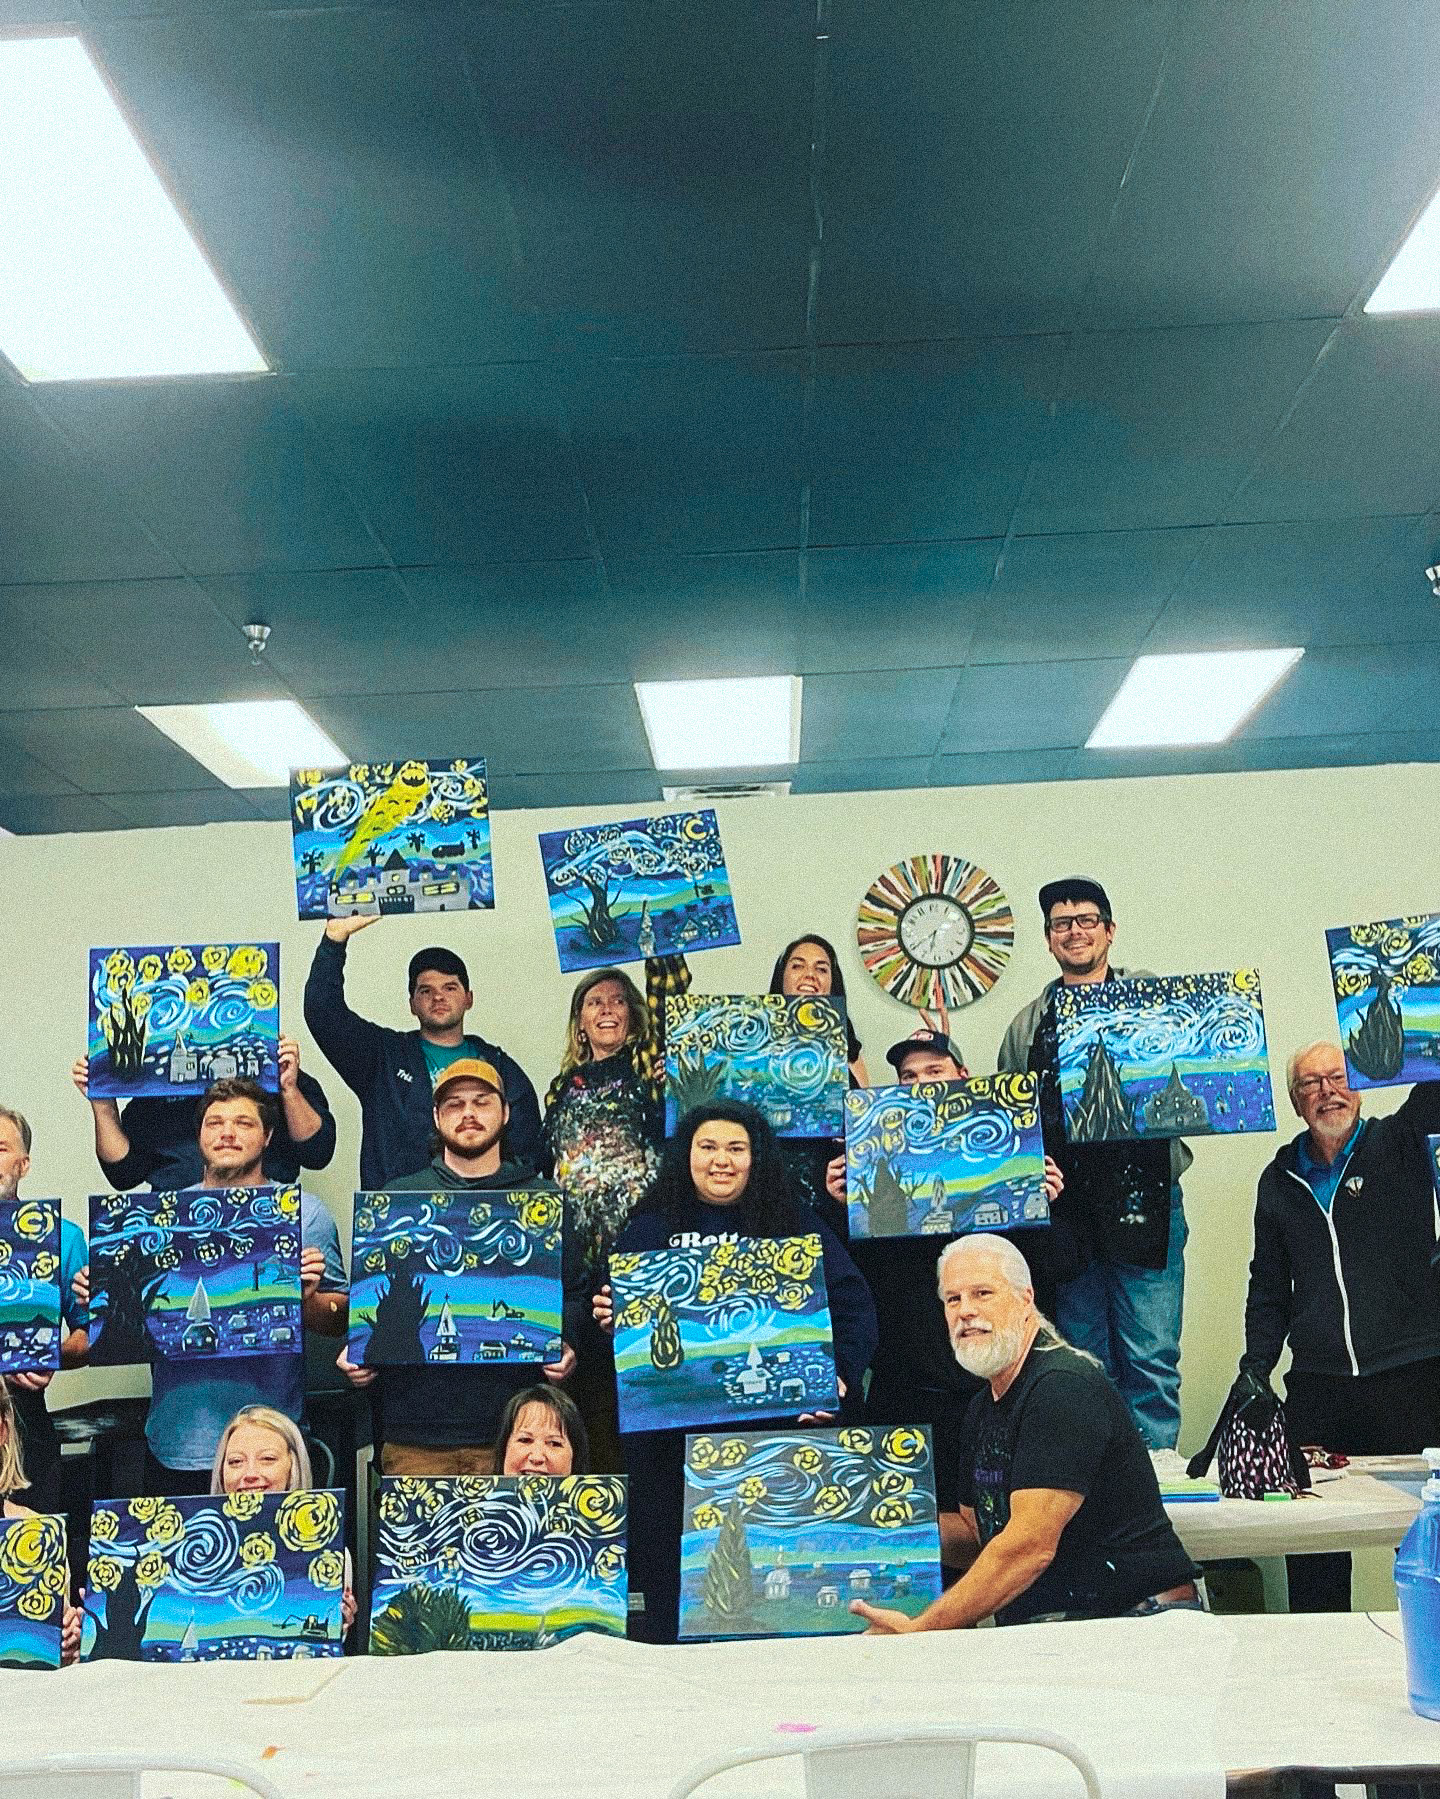 Word Rock Drills team at social painting event